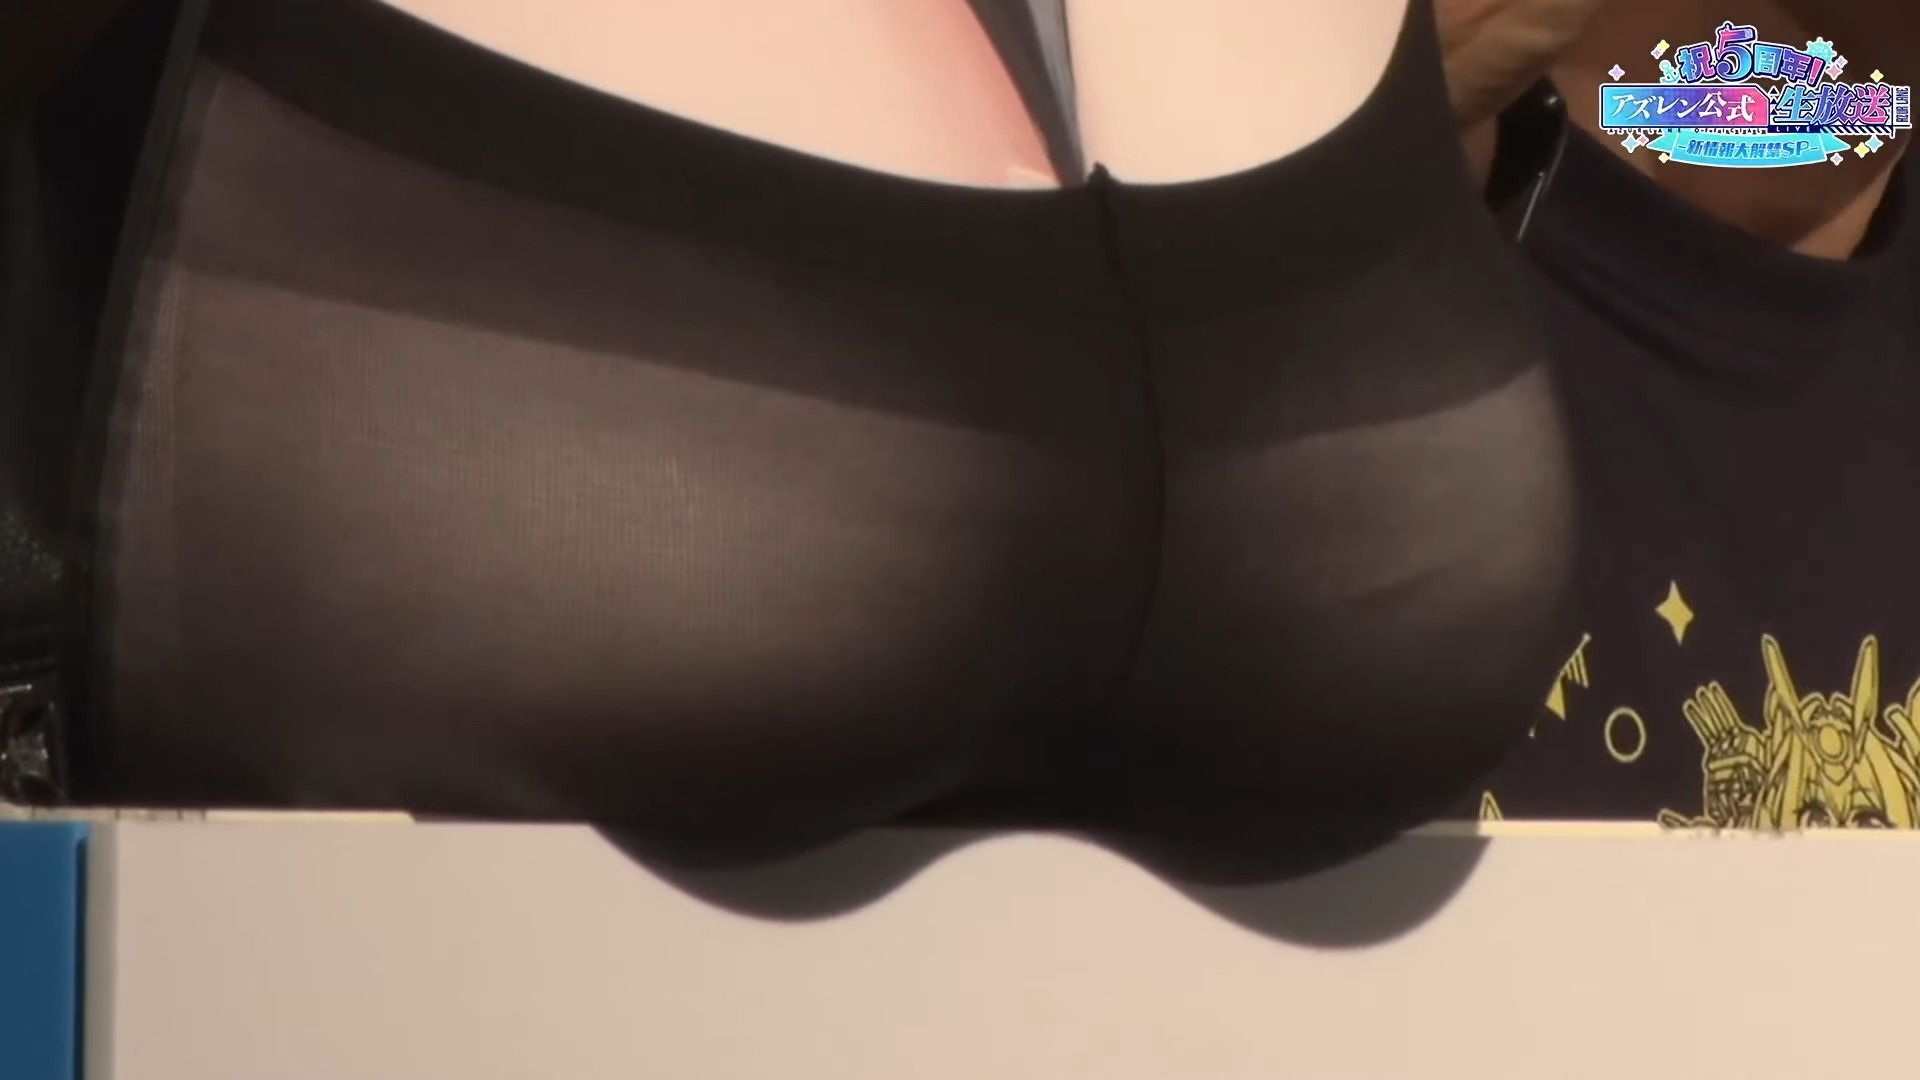 "Azure Lane" Introducing erotic goods such as rubbing the Dosquebe giant butt mouse pad made to wear tights 19